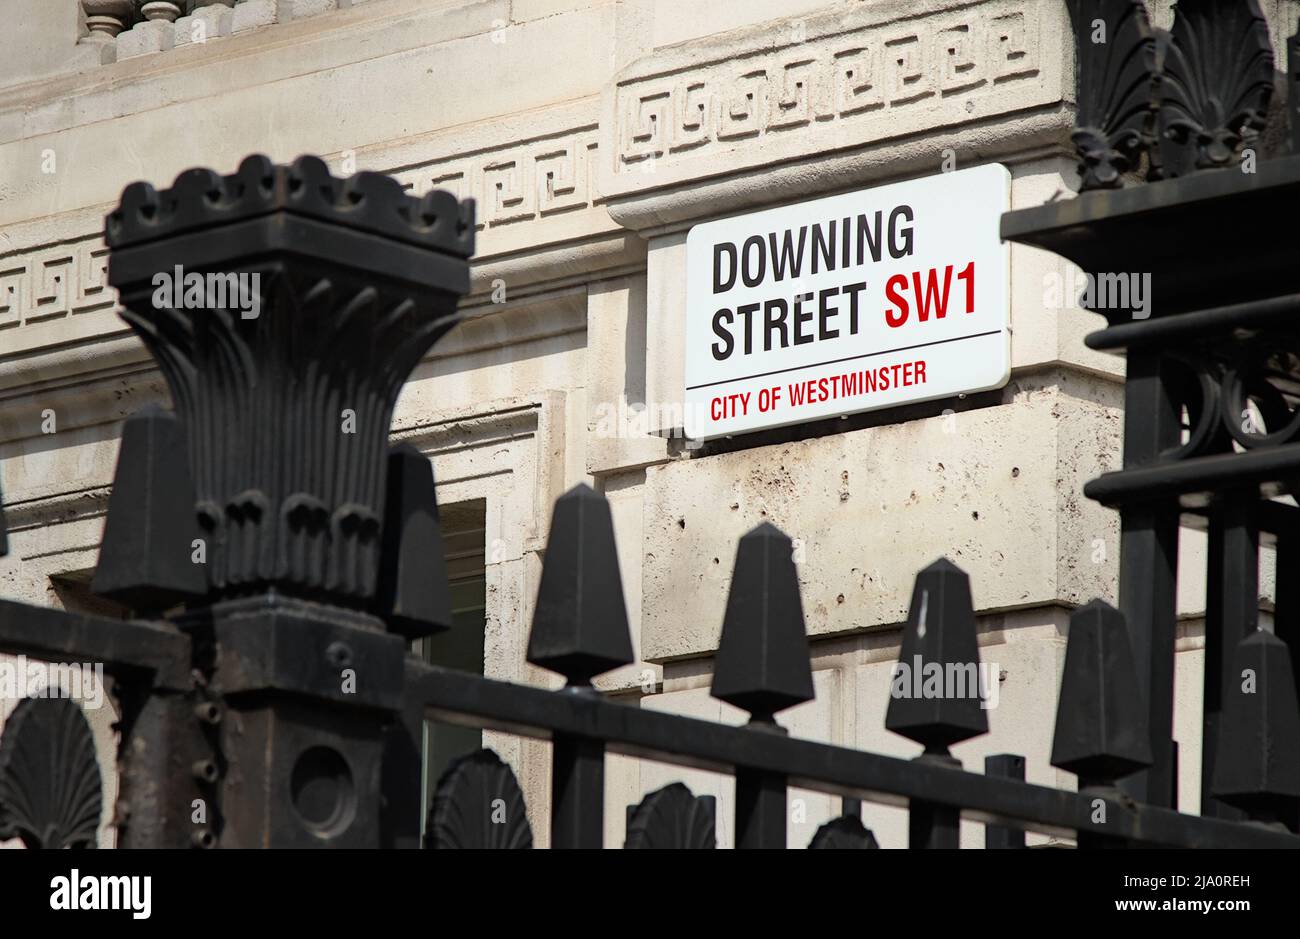 Enamelled Downing Street Sign SW1 Seen Through Metal Protective Fence Outside 10 Downing Street London Uk Stock Photo